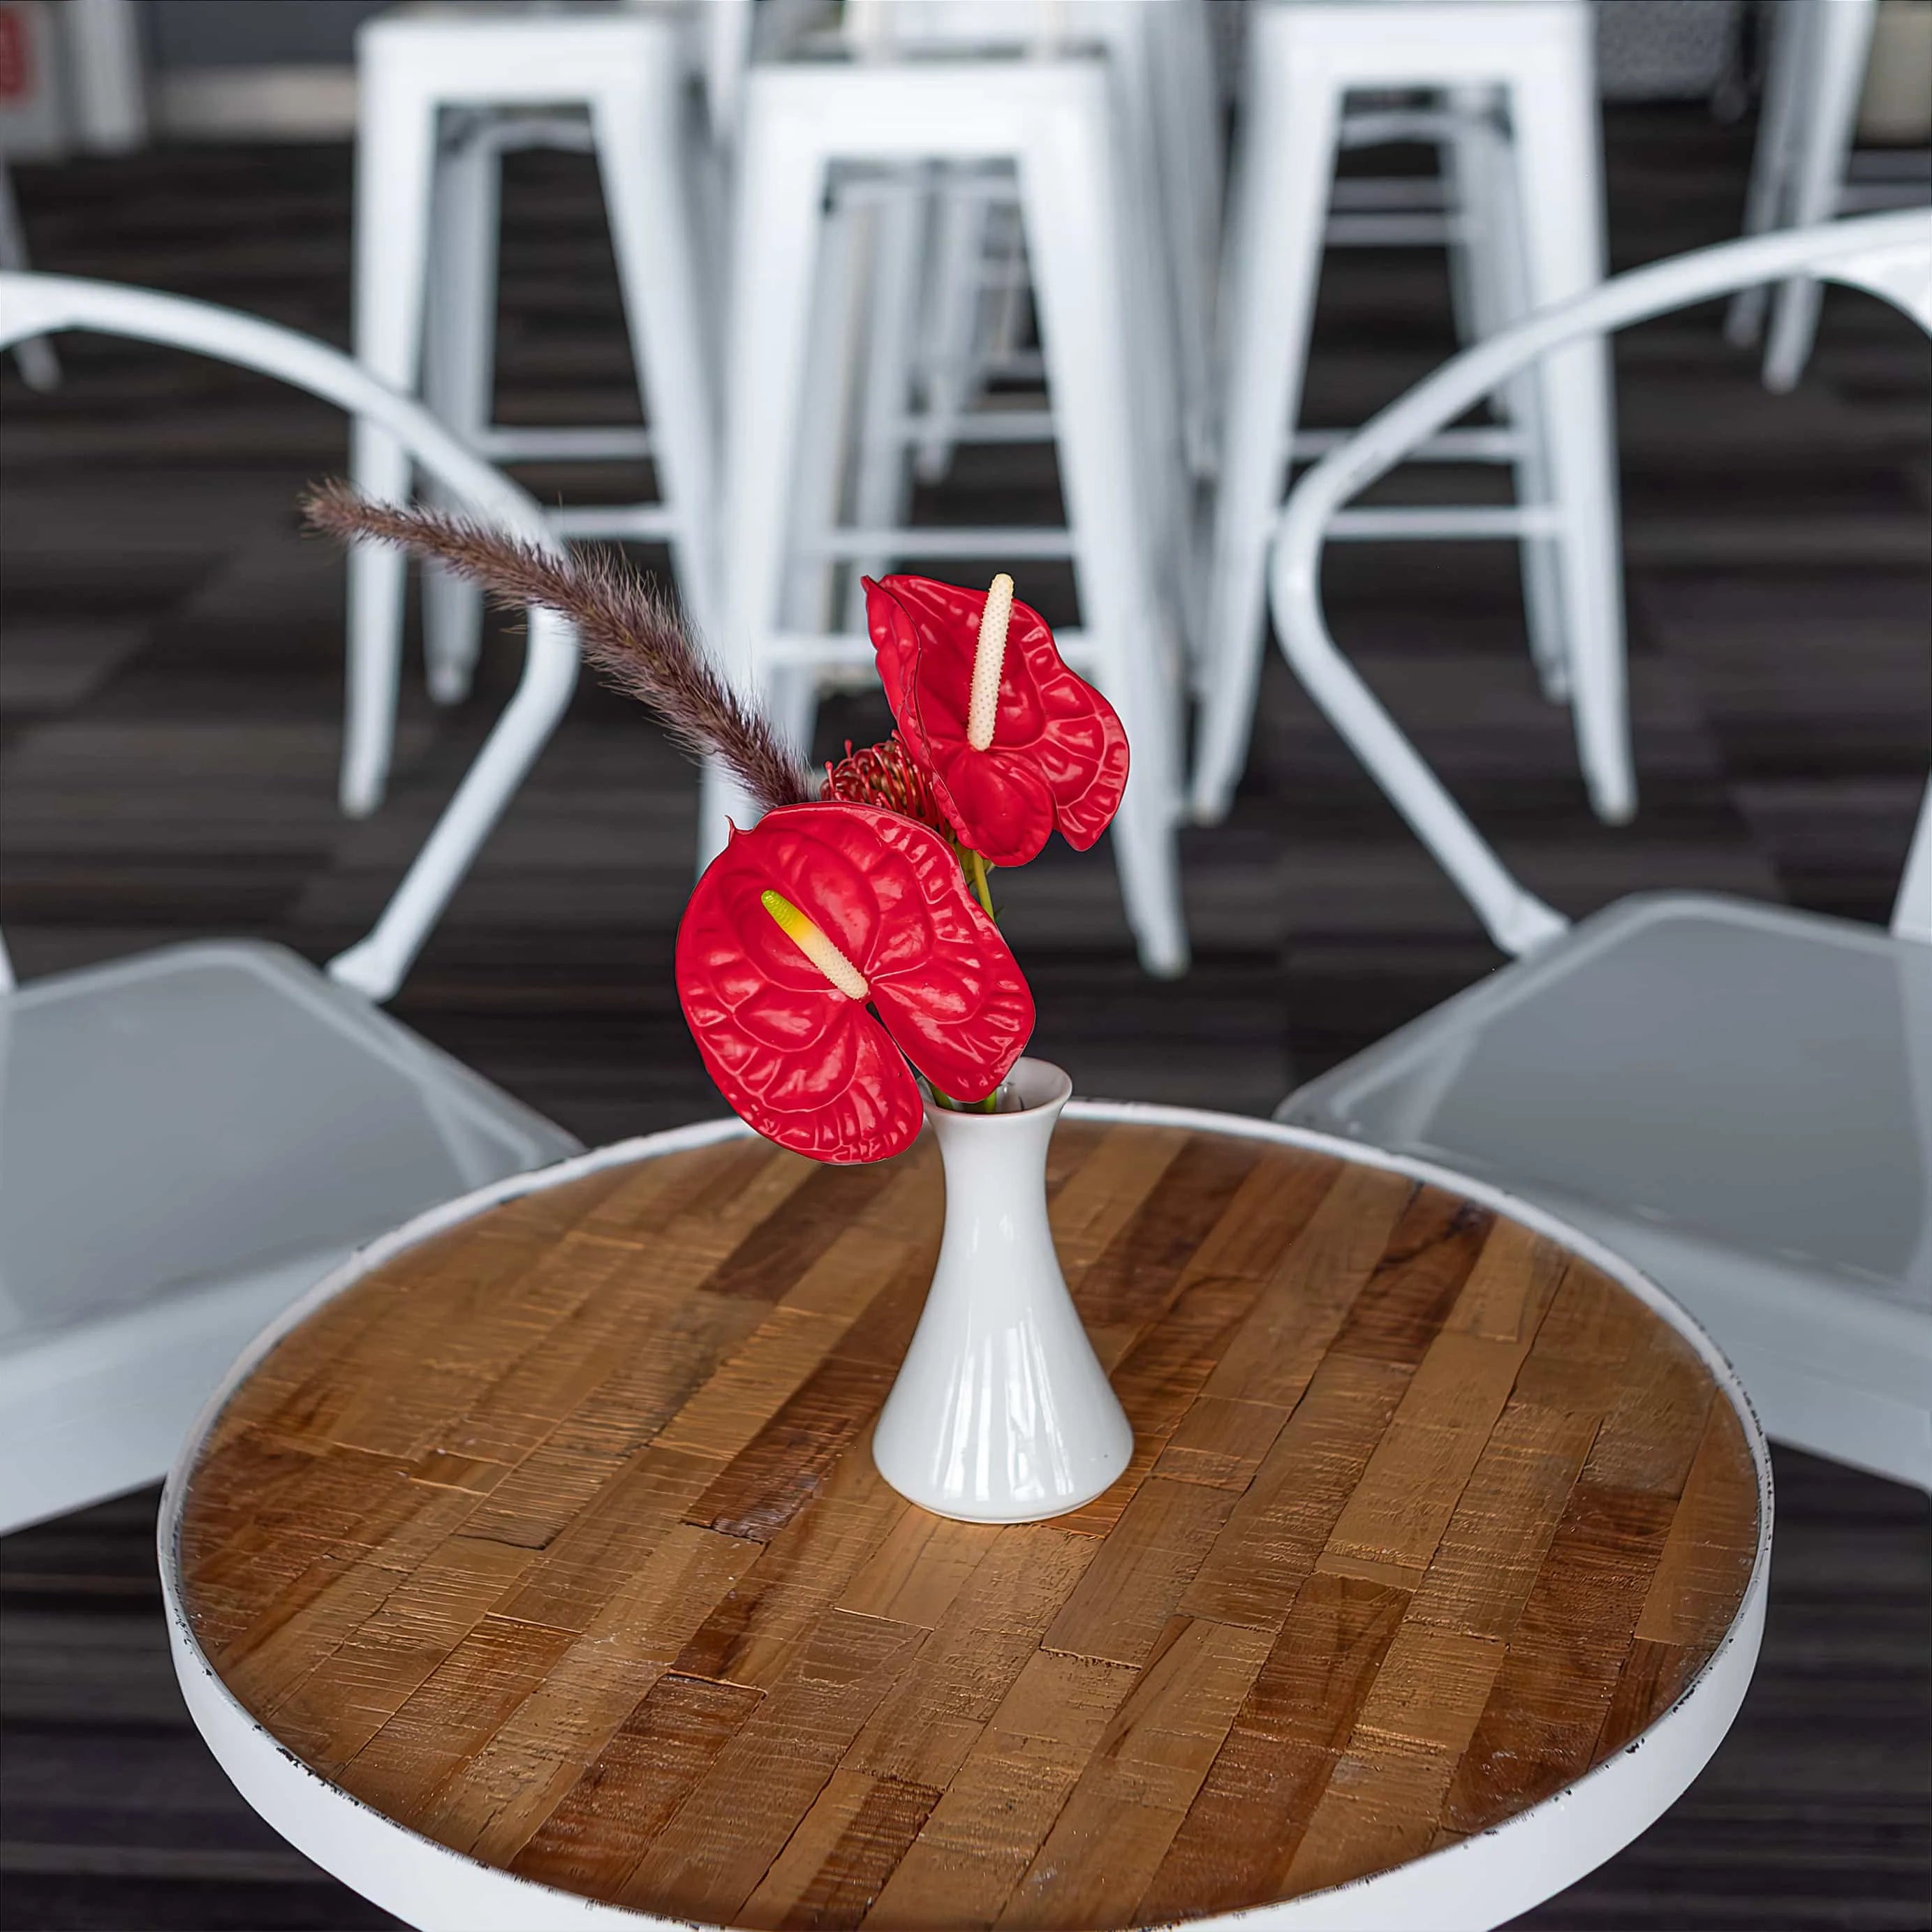 Vibrant table centerpiece by Amaranté London featuring red anthuriums and exotic feathers in a sleek white vase, set in a contemporary white-themed Formula E lounge, symbolising energy and passion - Amaranté London, Event Florist.